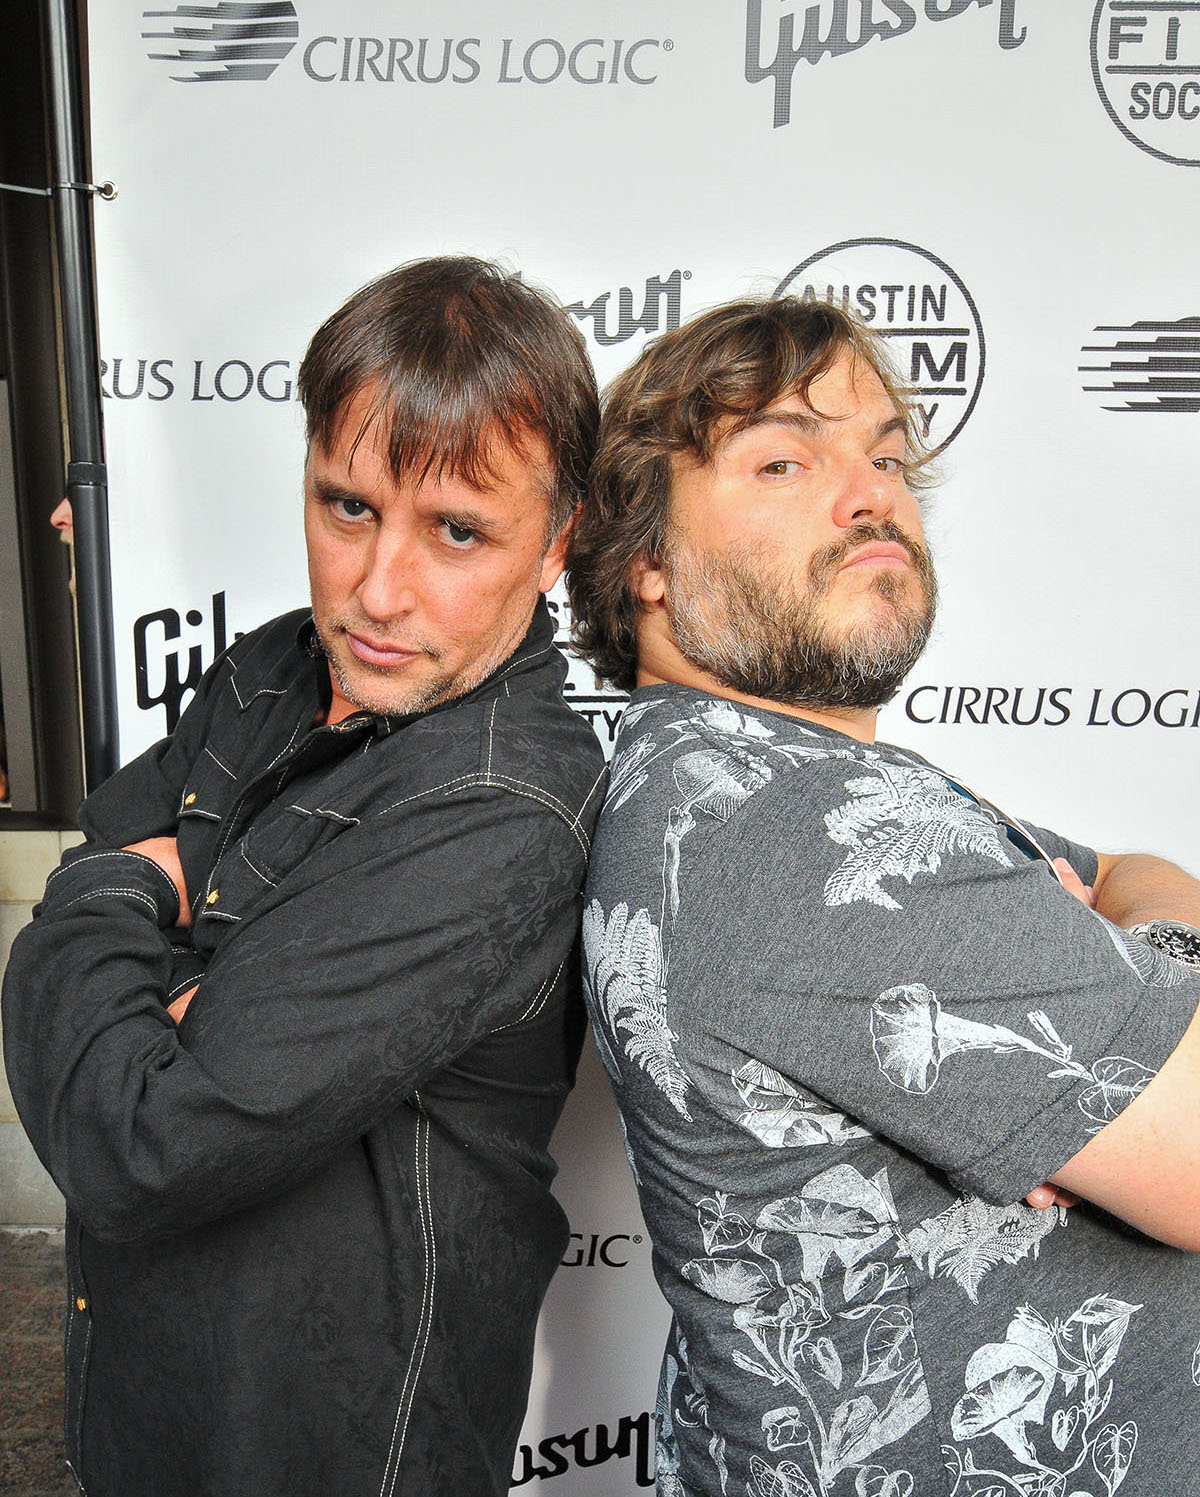 Linklater stands with arms crossed back to back with actor Jack Black